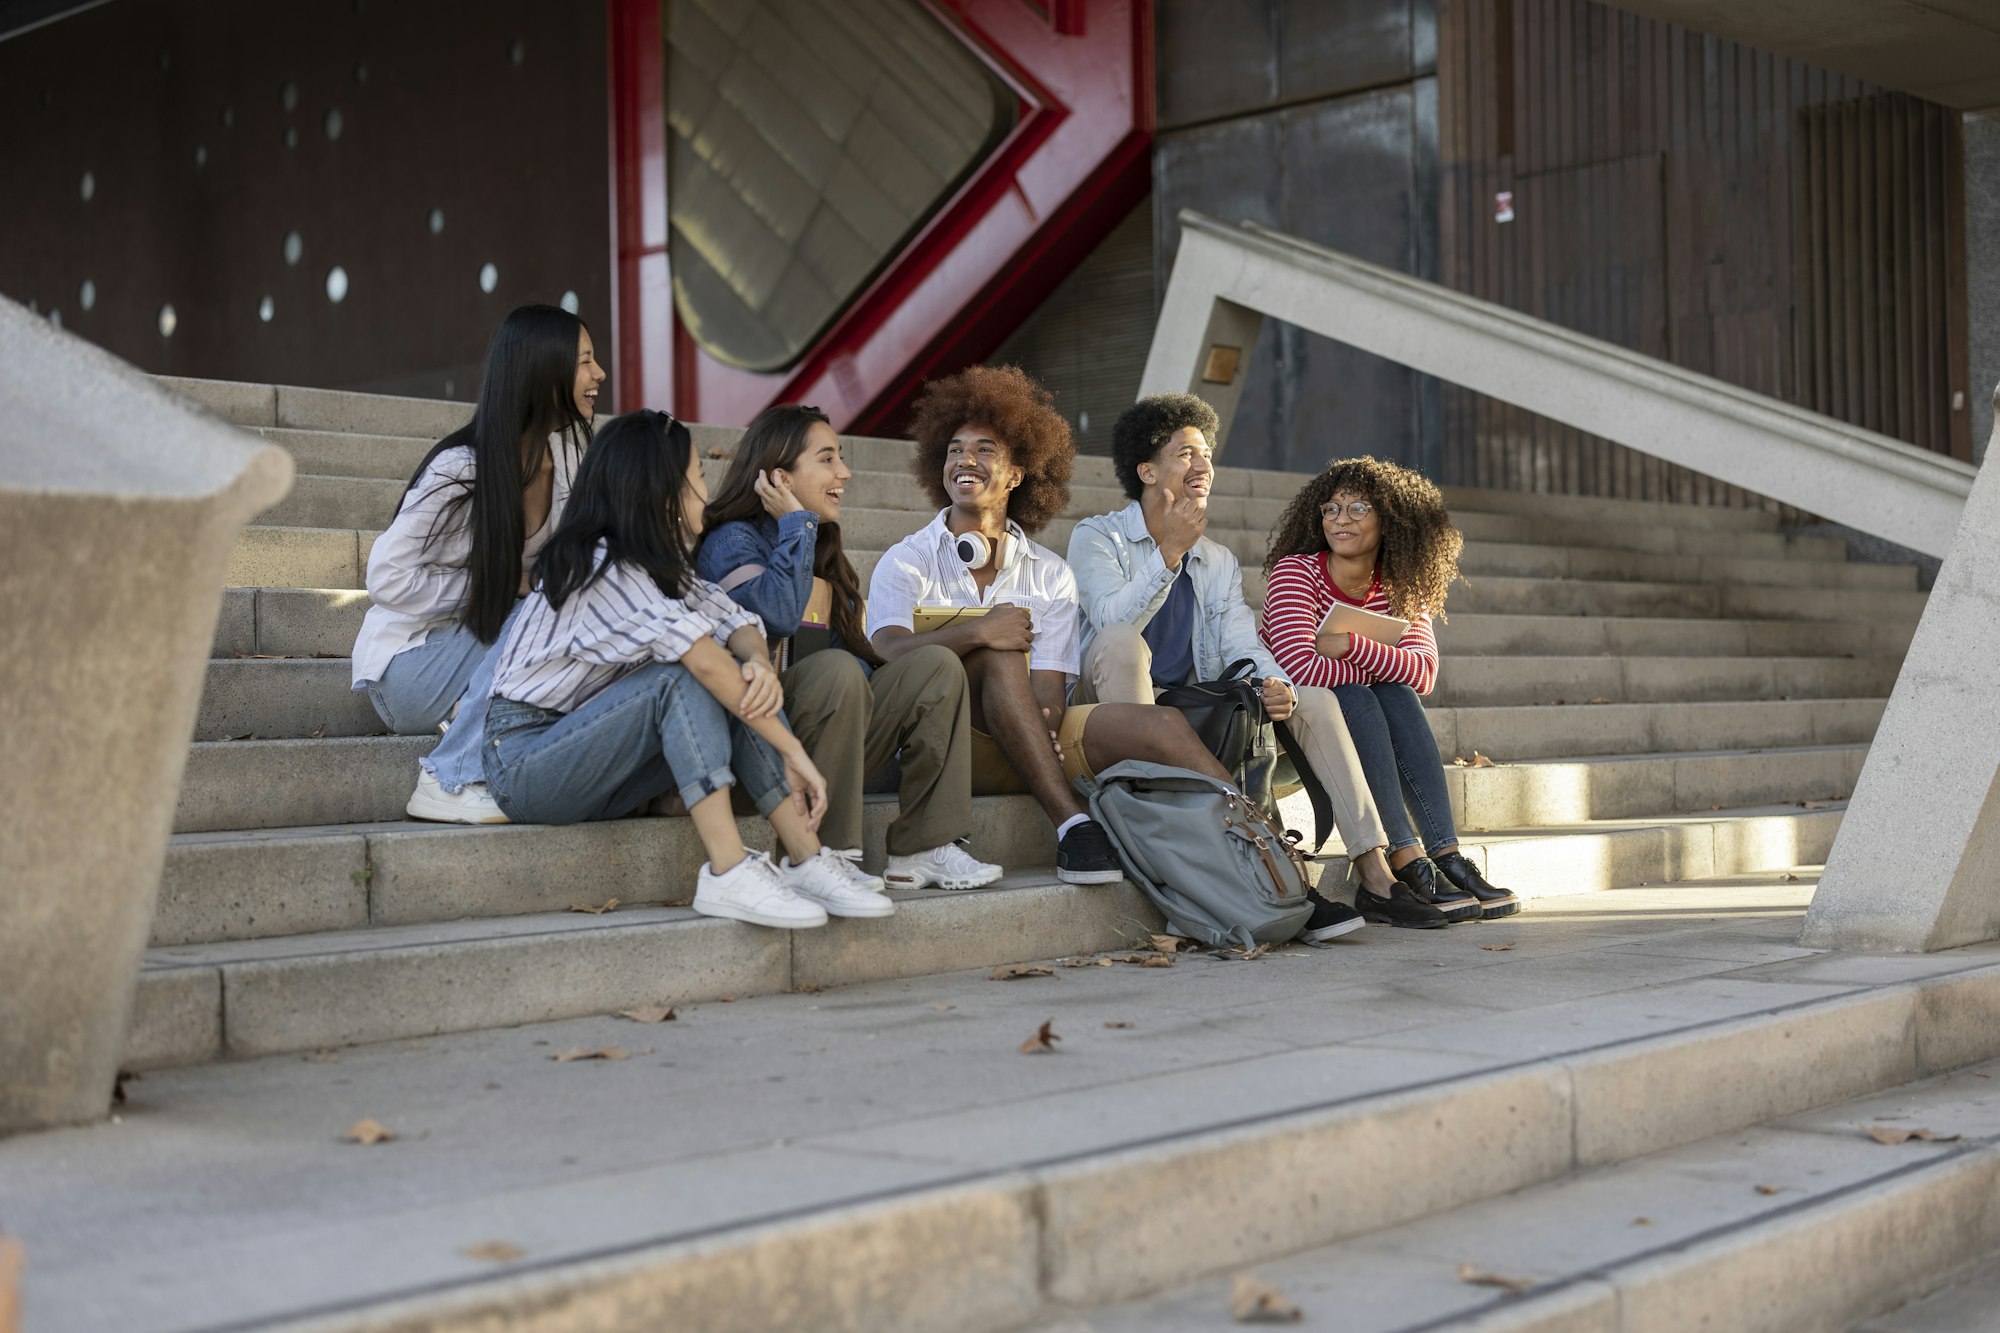 Group of multiracial students talking and sitting on the stairs of the university.